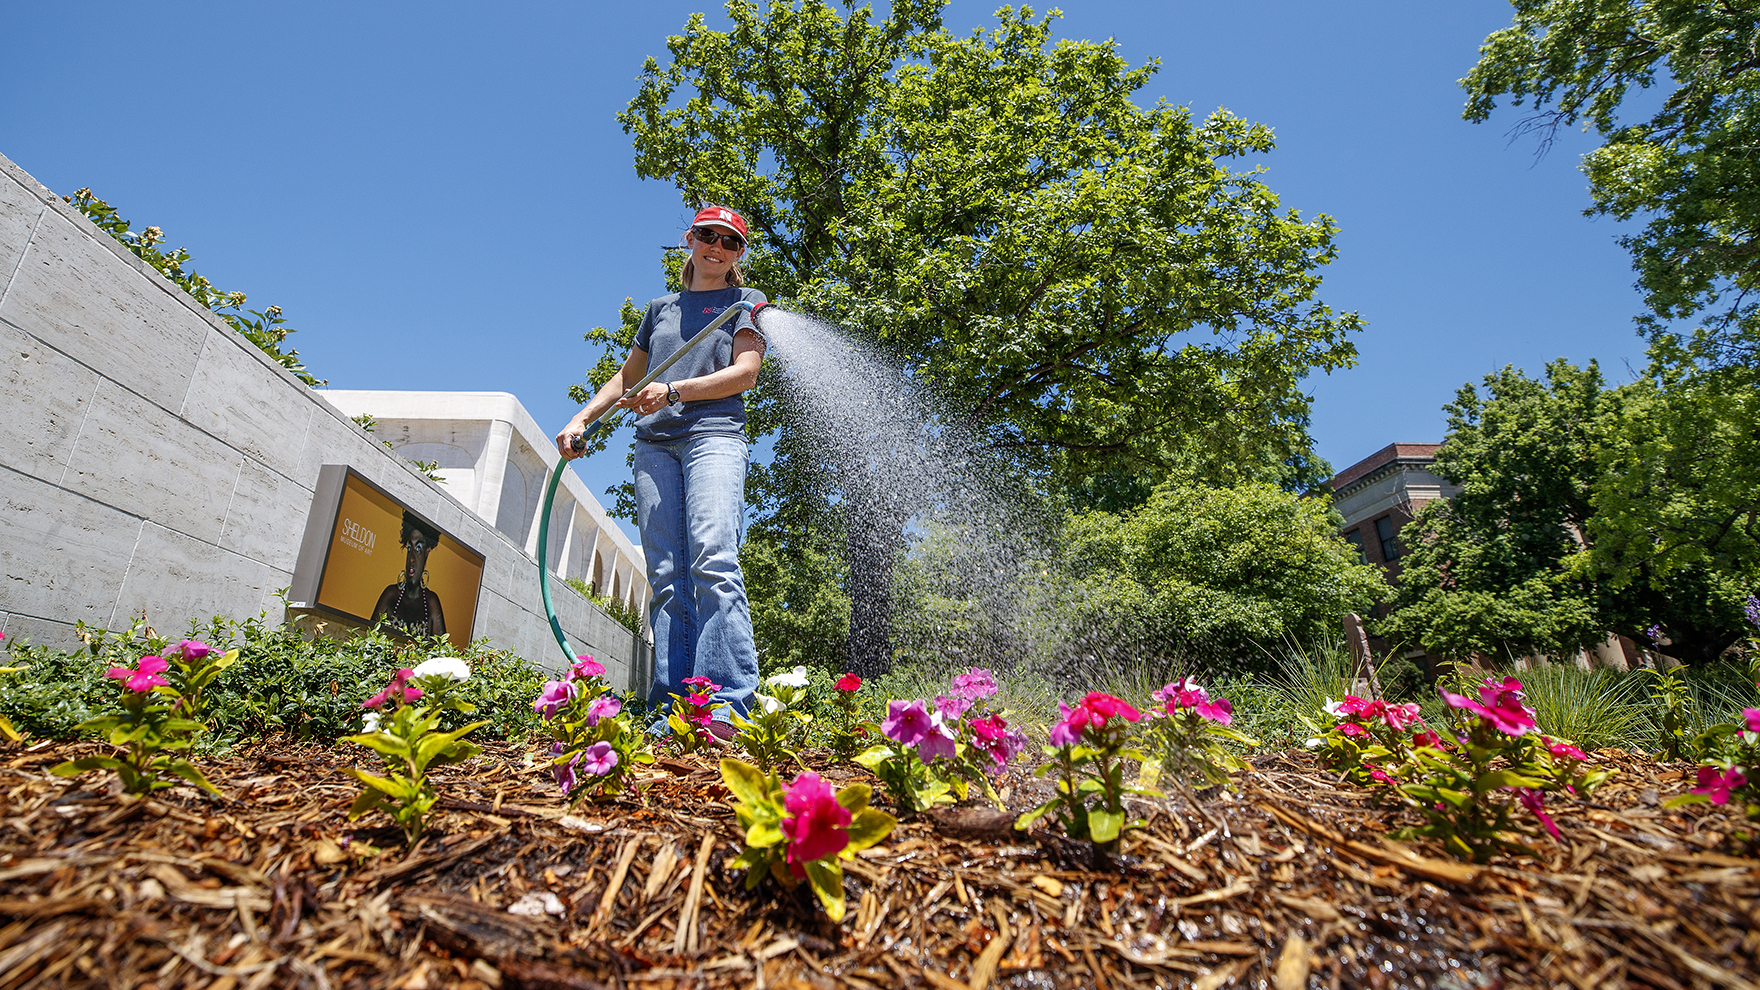 Karen Wilson with Landscape Services waters the flowers outside of the Sheldon Art Museum in this file photo from 2020.